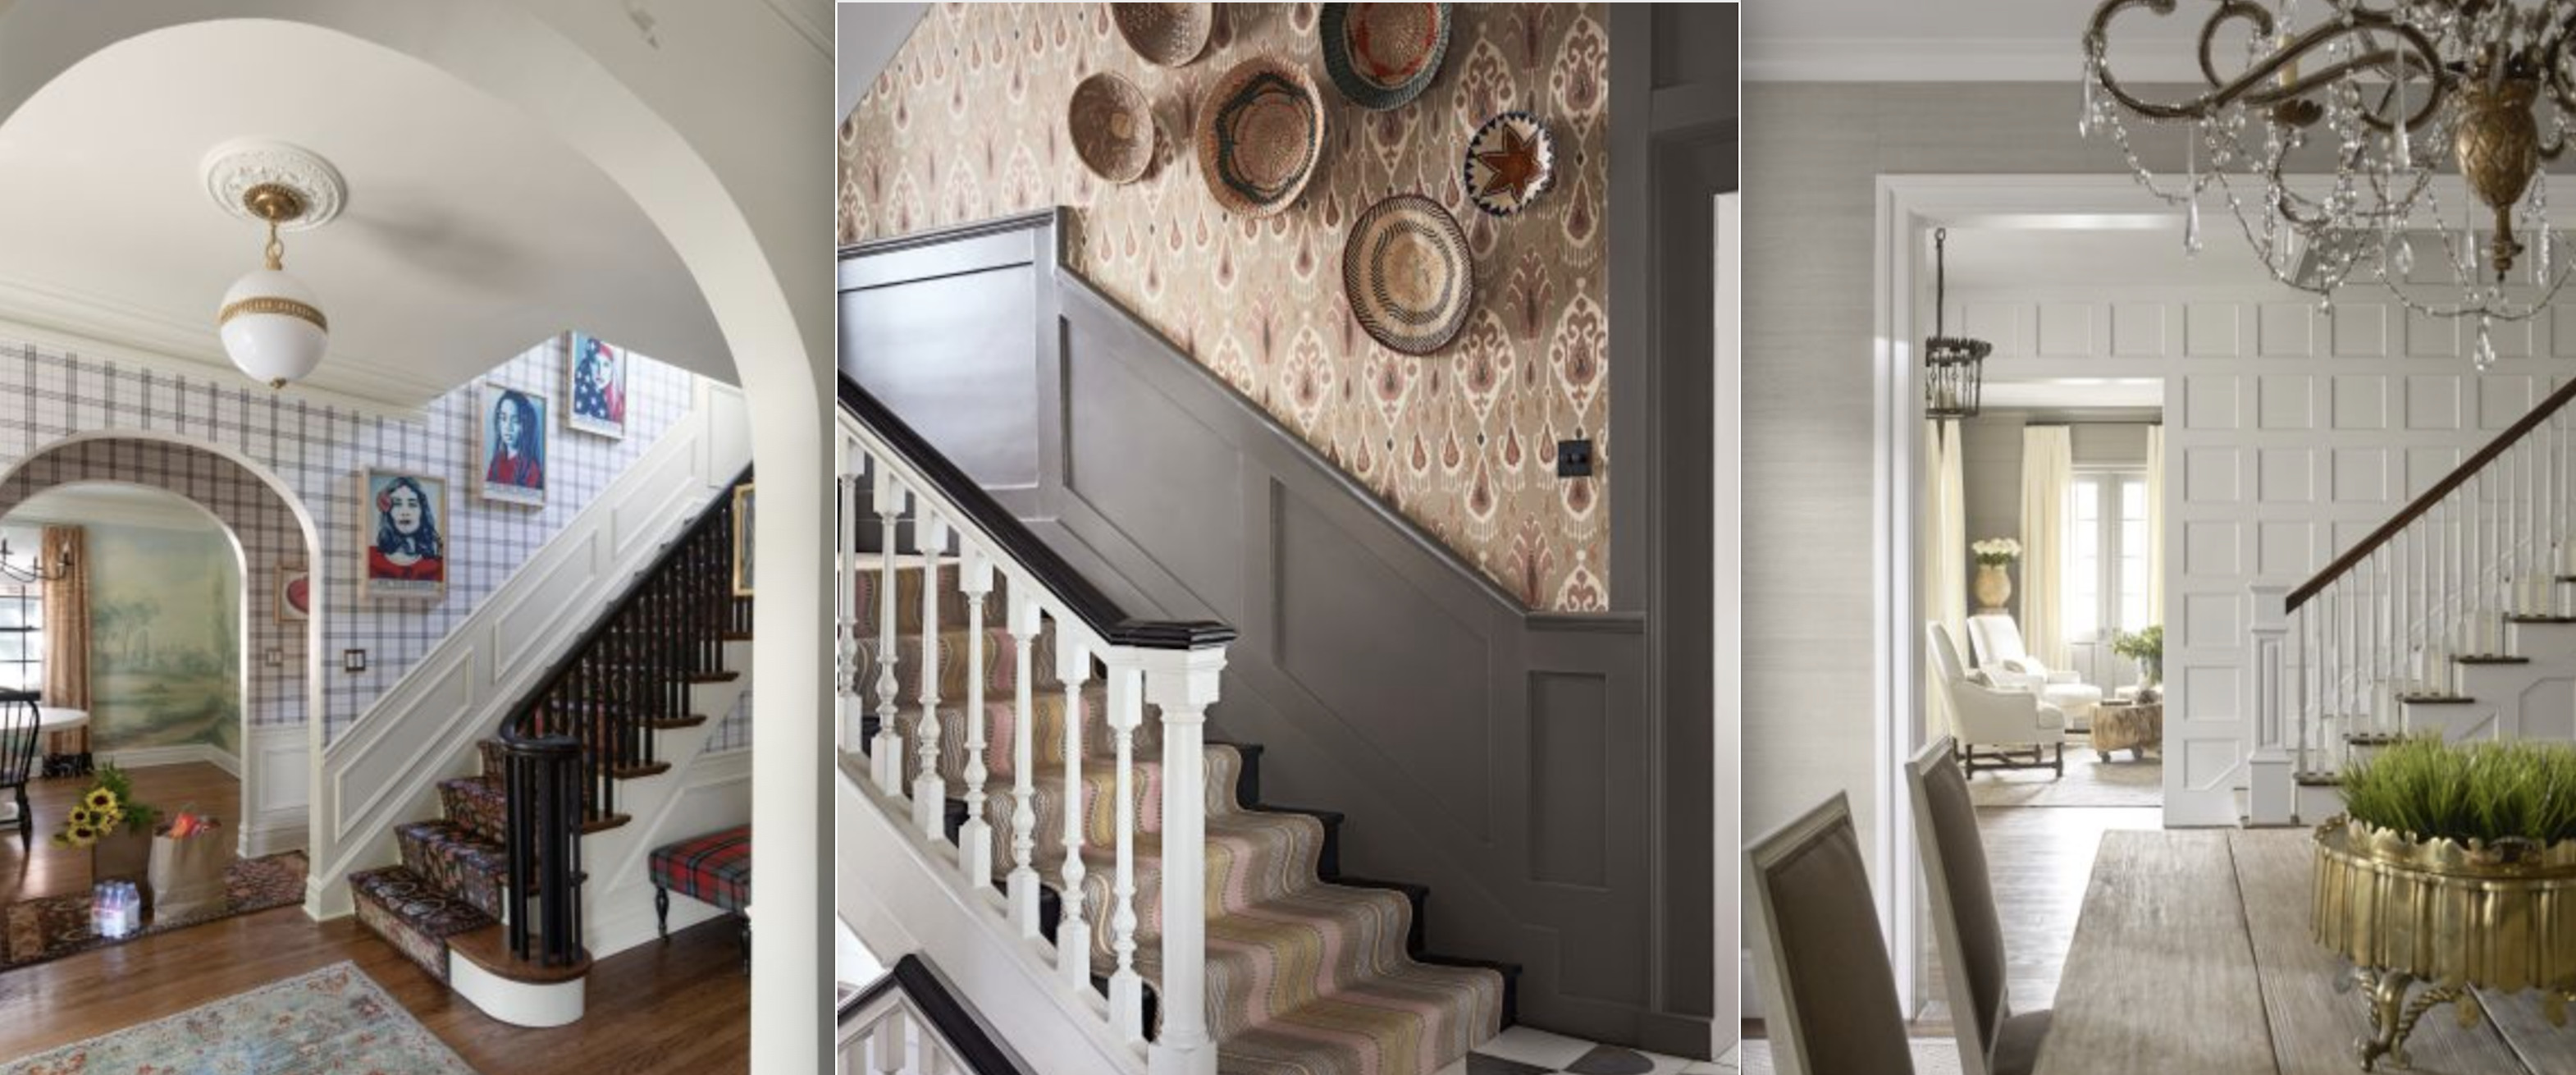 Staircase wall ideas 21 ways to dress stair walls beautifully  